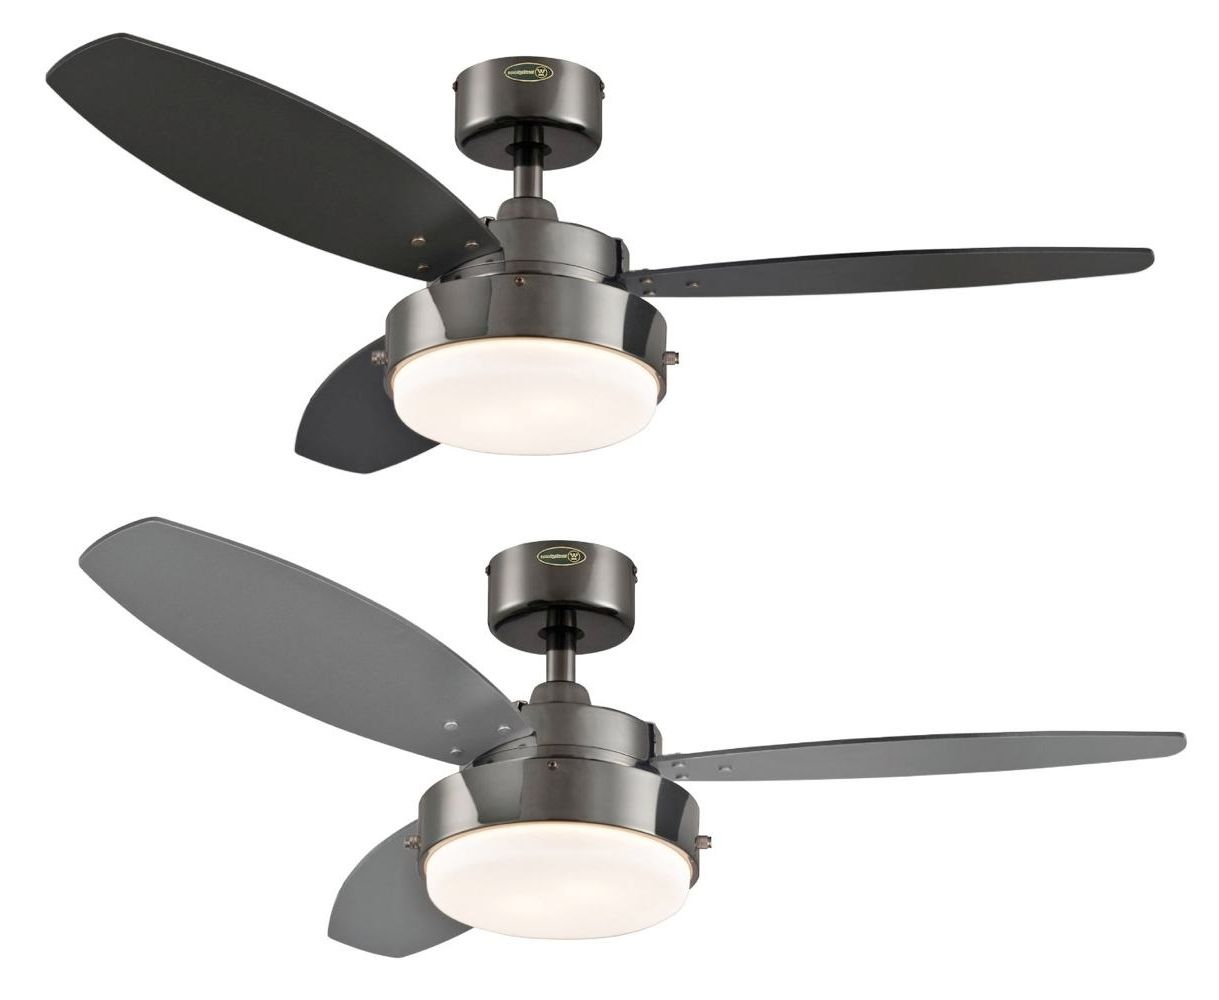 Most Recent 36 Inch Outdoor Ceiling Fans Inside 36 Outdoor Ceiling Fan – Photos House Interior And Fan (View 5 of 20)